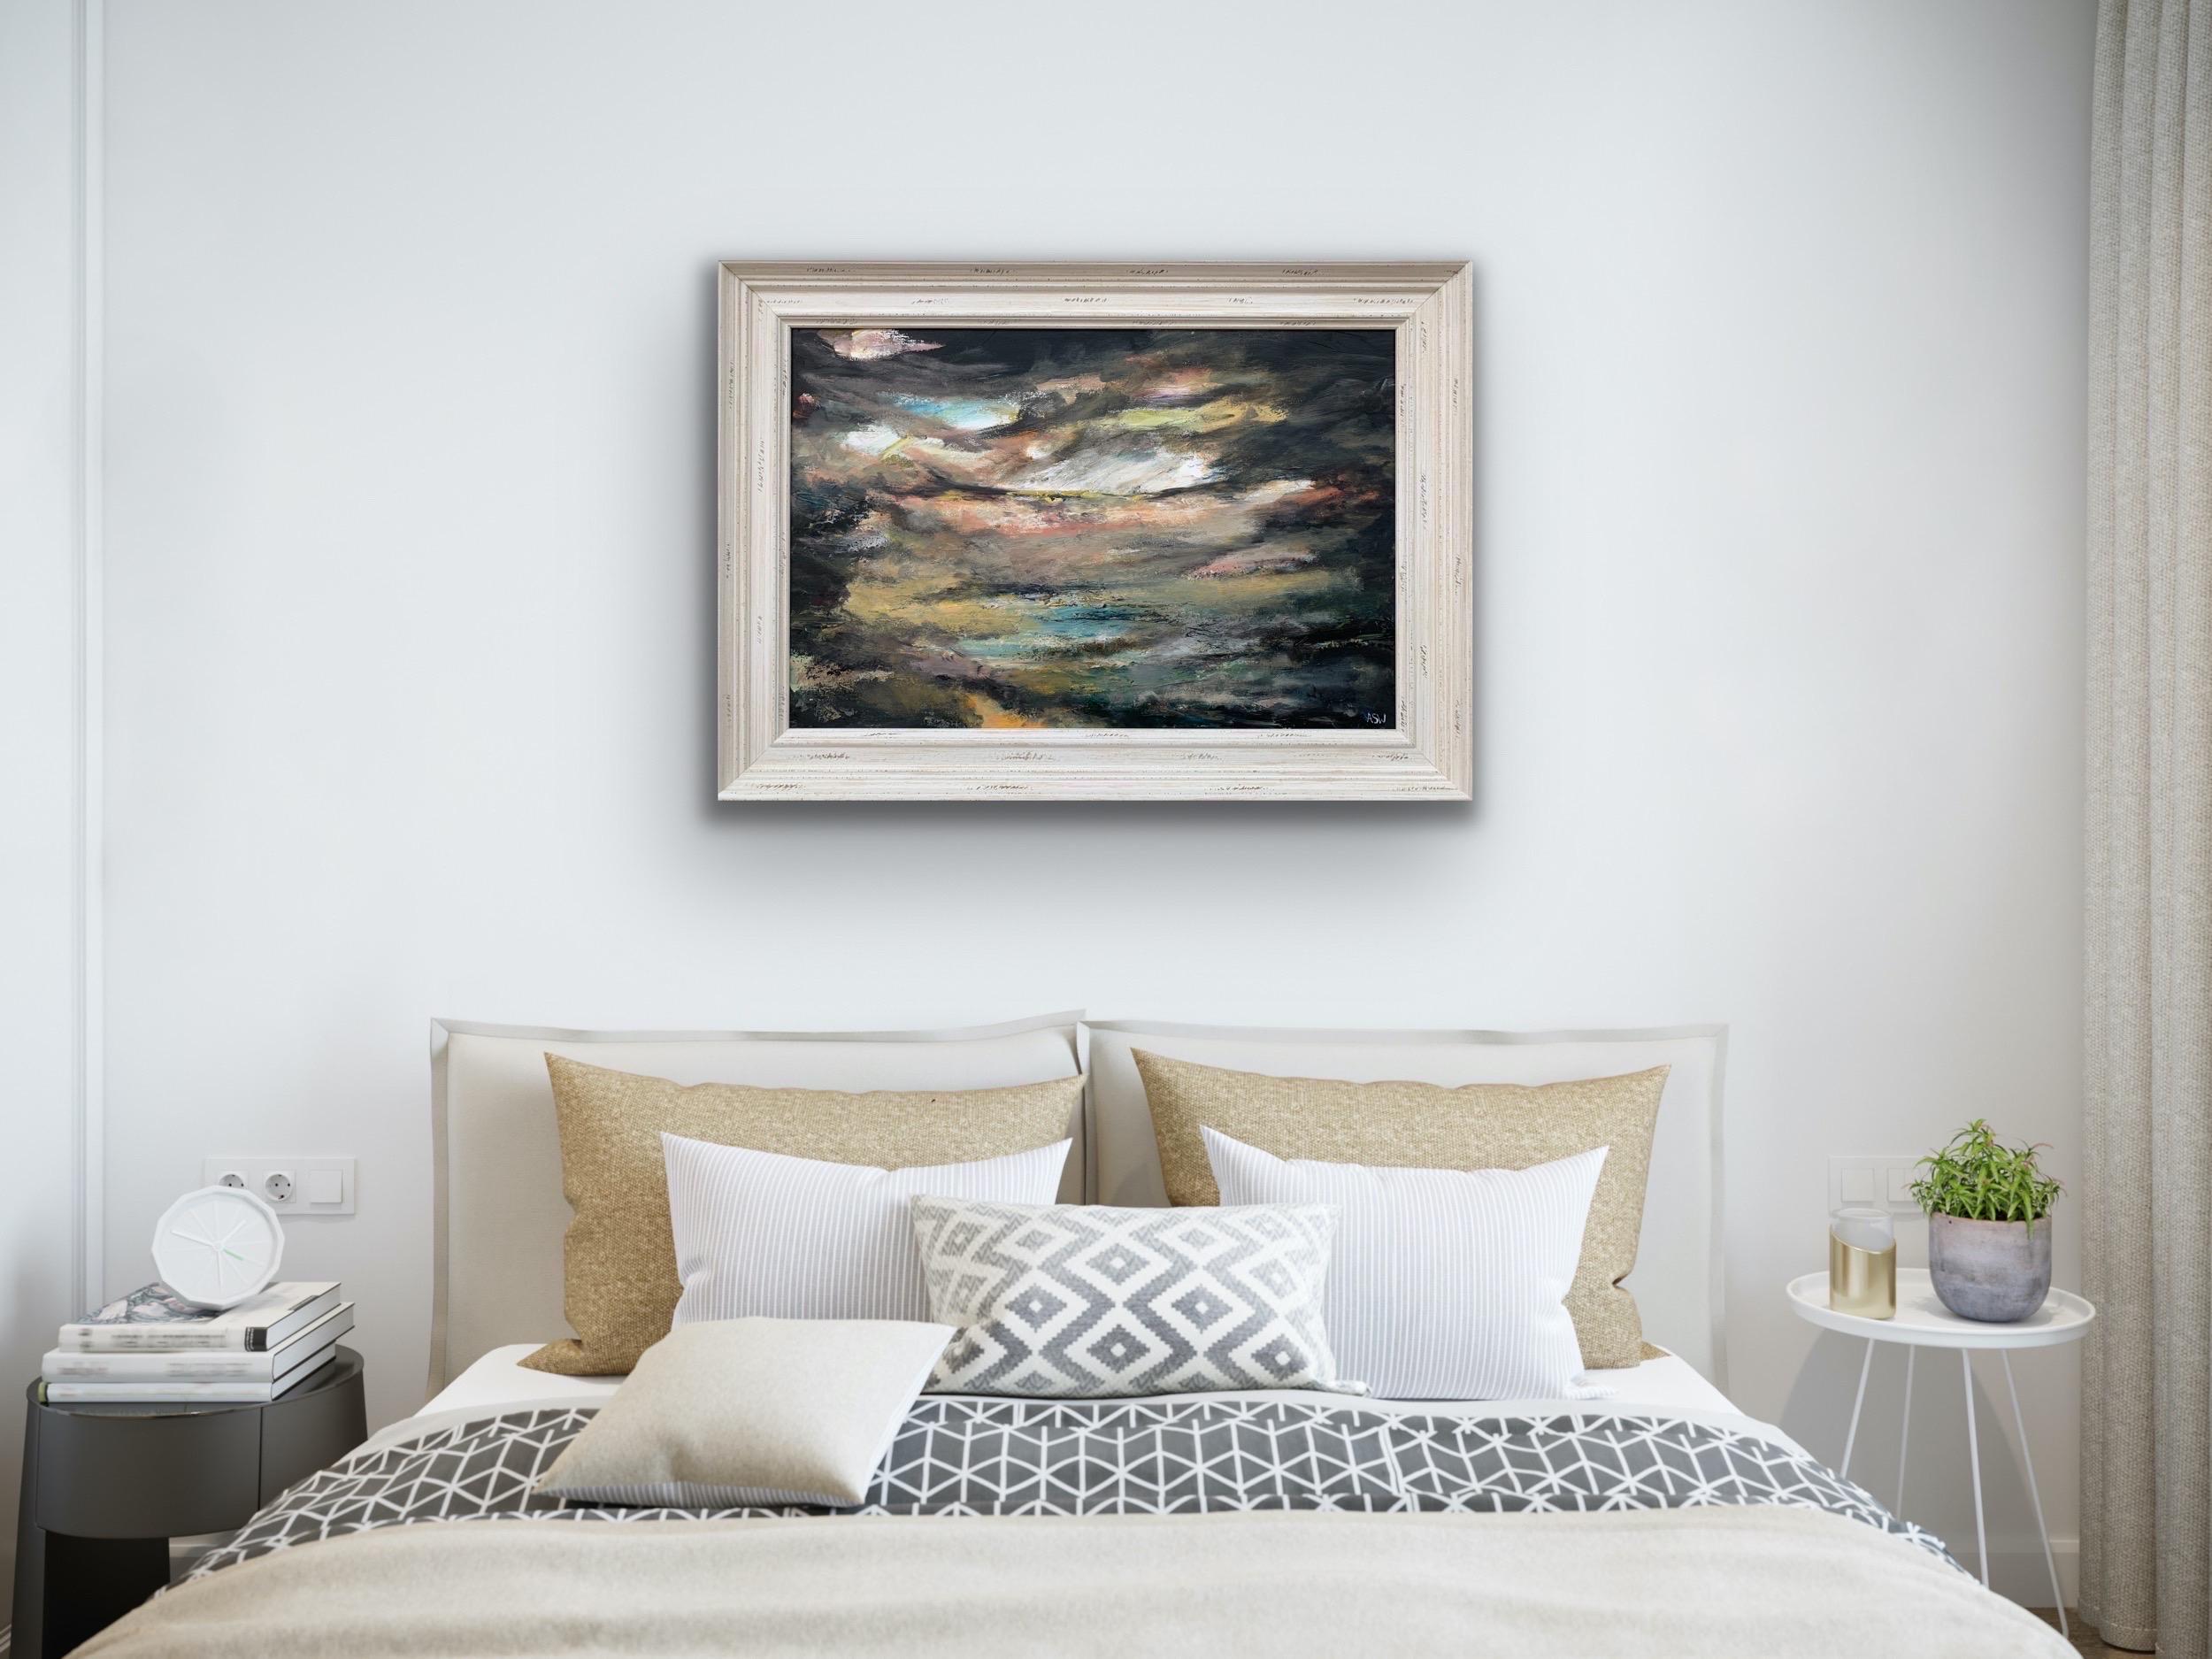 Dark Atmospheric Abstract Landscape Painting of the English Countryside by Leading Contemporary British Artist, Angela Wakefield 

Art measures 30 x 20 inches
Frame measure 35.5 x 25.5 inches 

Angela Wakefield has twice been on the front cover of